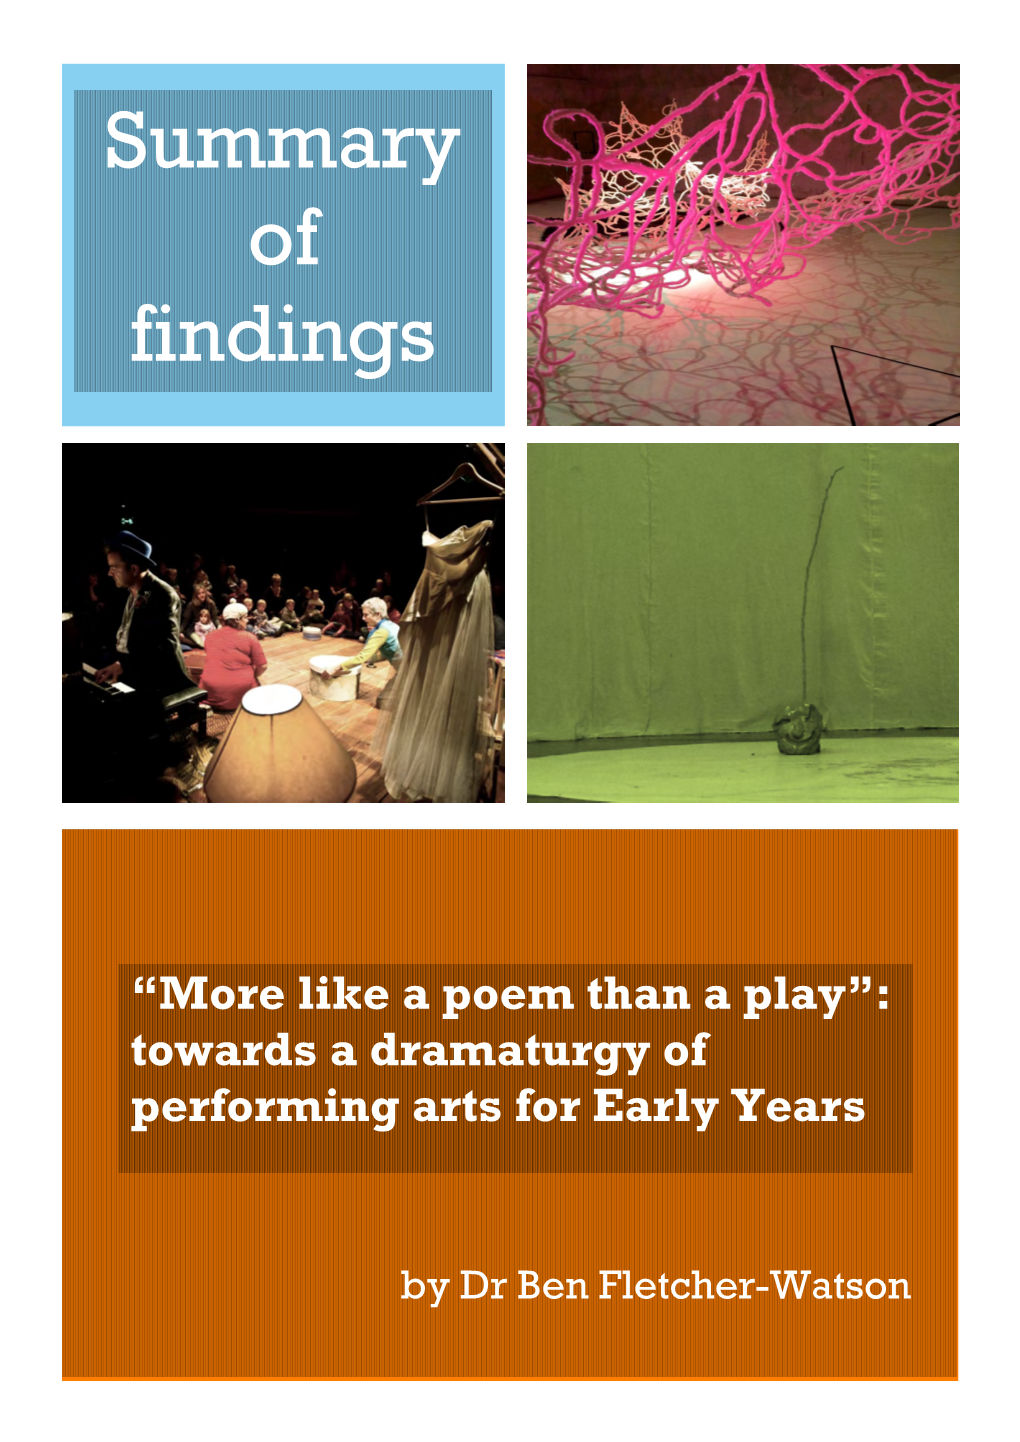 “More Like a Poem Than a Play”: Towards a Dramaturgy of Performing Arts for Early Years